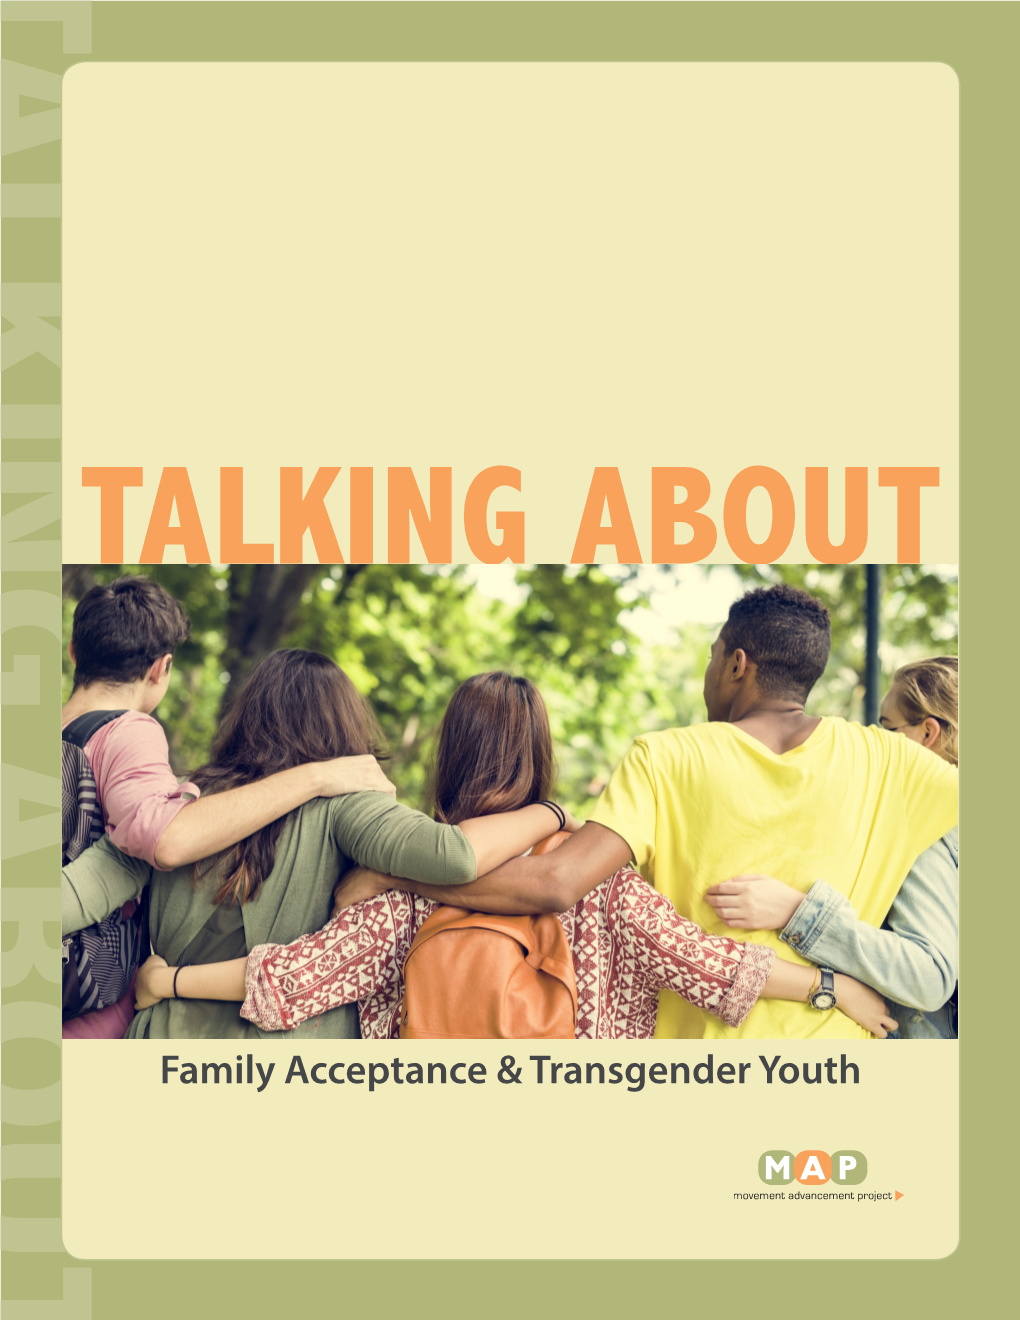 Guide Talking About Family Acceptance & Transgender Youth